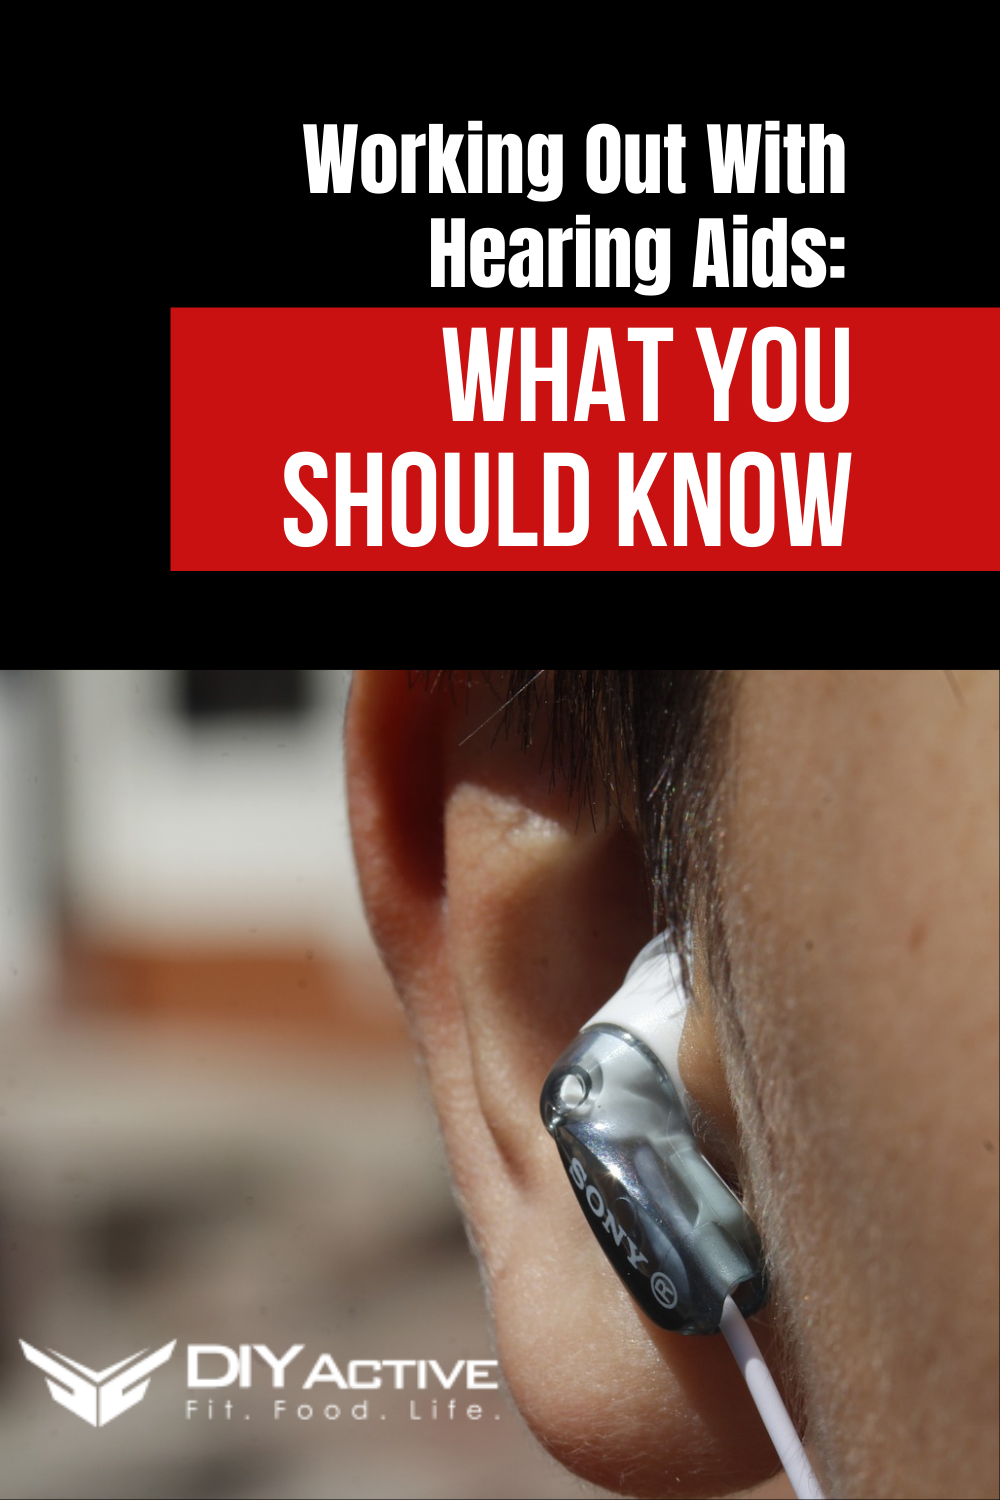 Working Out With Hearing Aids: What You Should Know